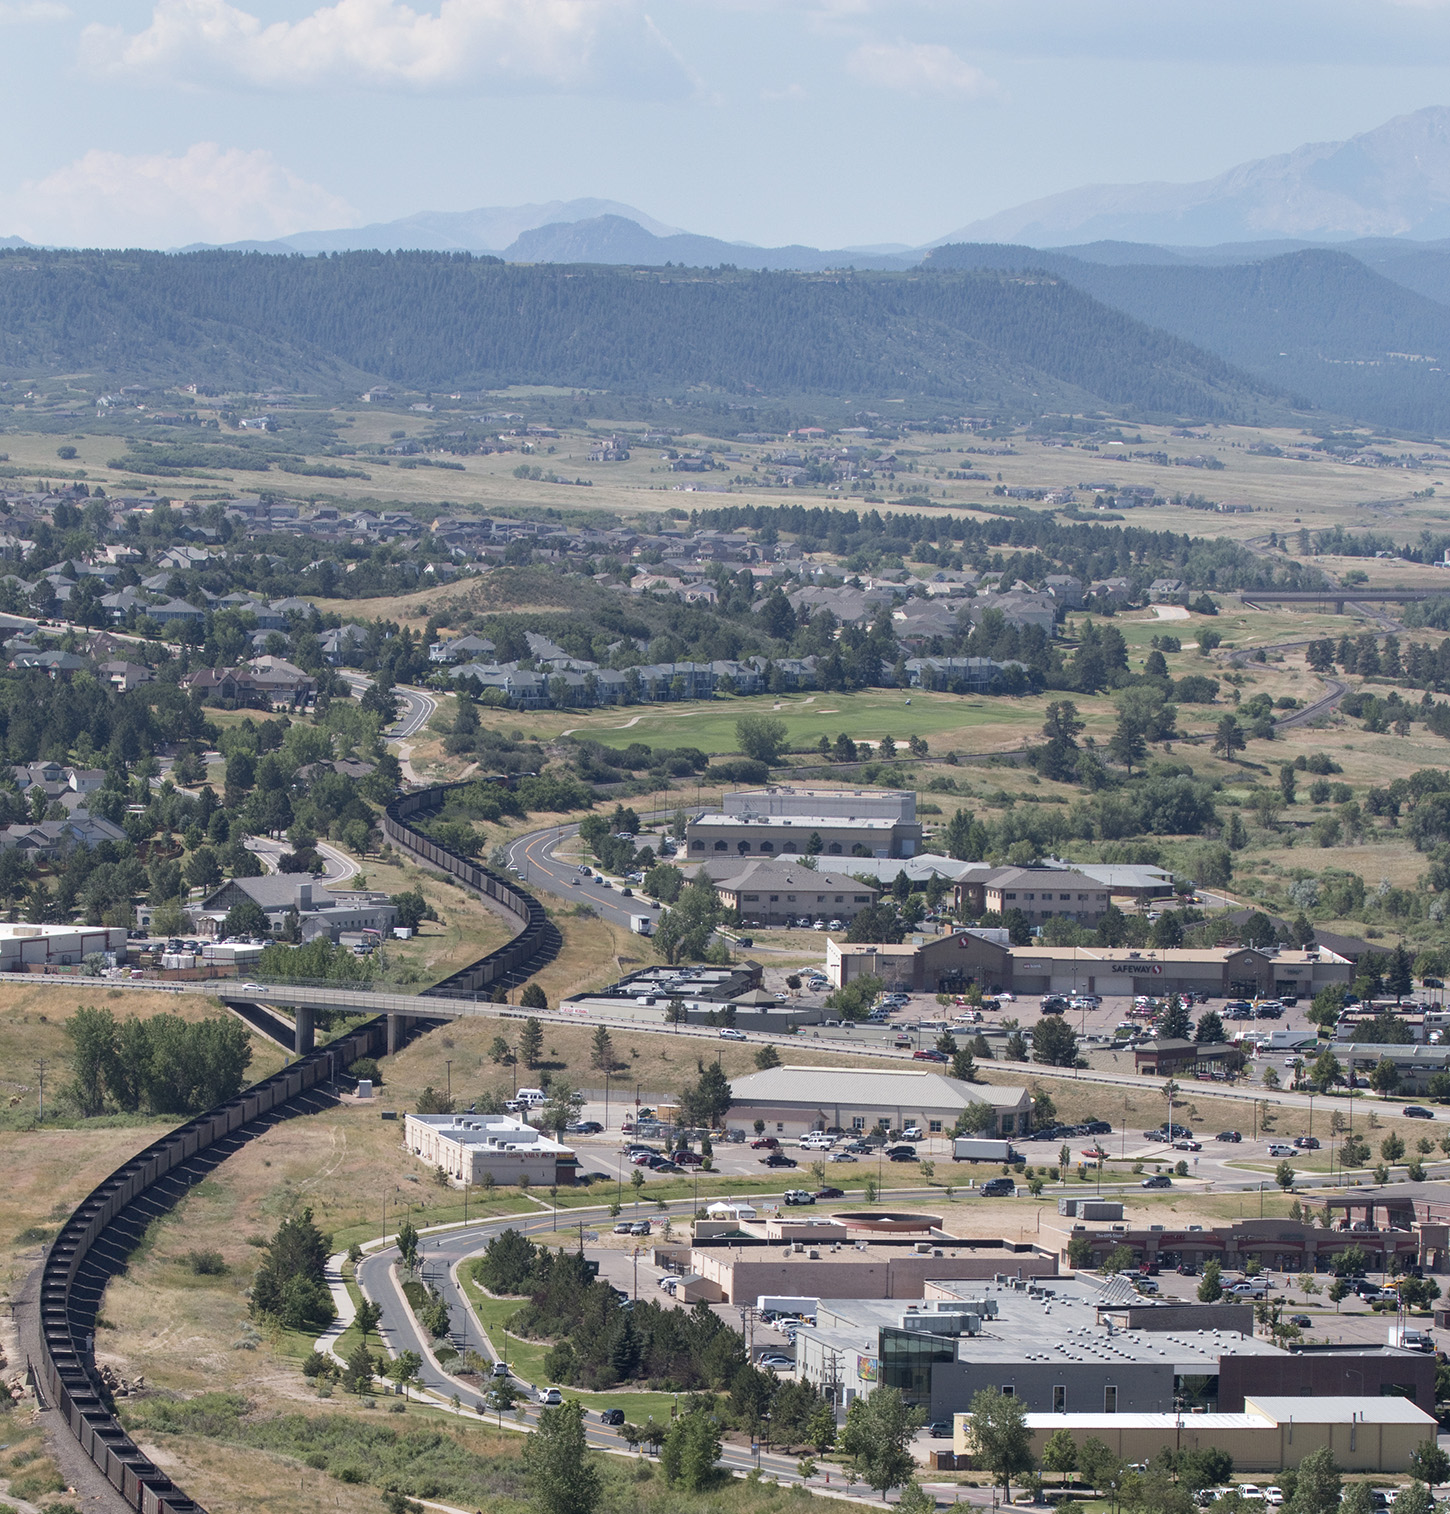 A long, empty coal train snakes through the town Castle Rock, Colorado past homes and businesses with Pikes Peak and the Rocky Mountains in the distance.